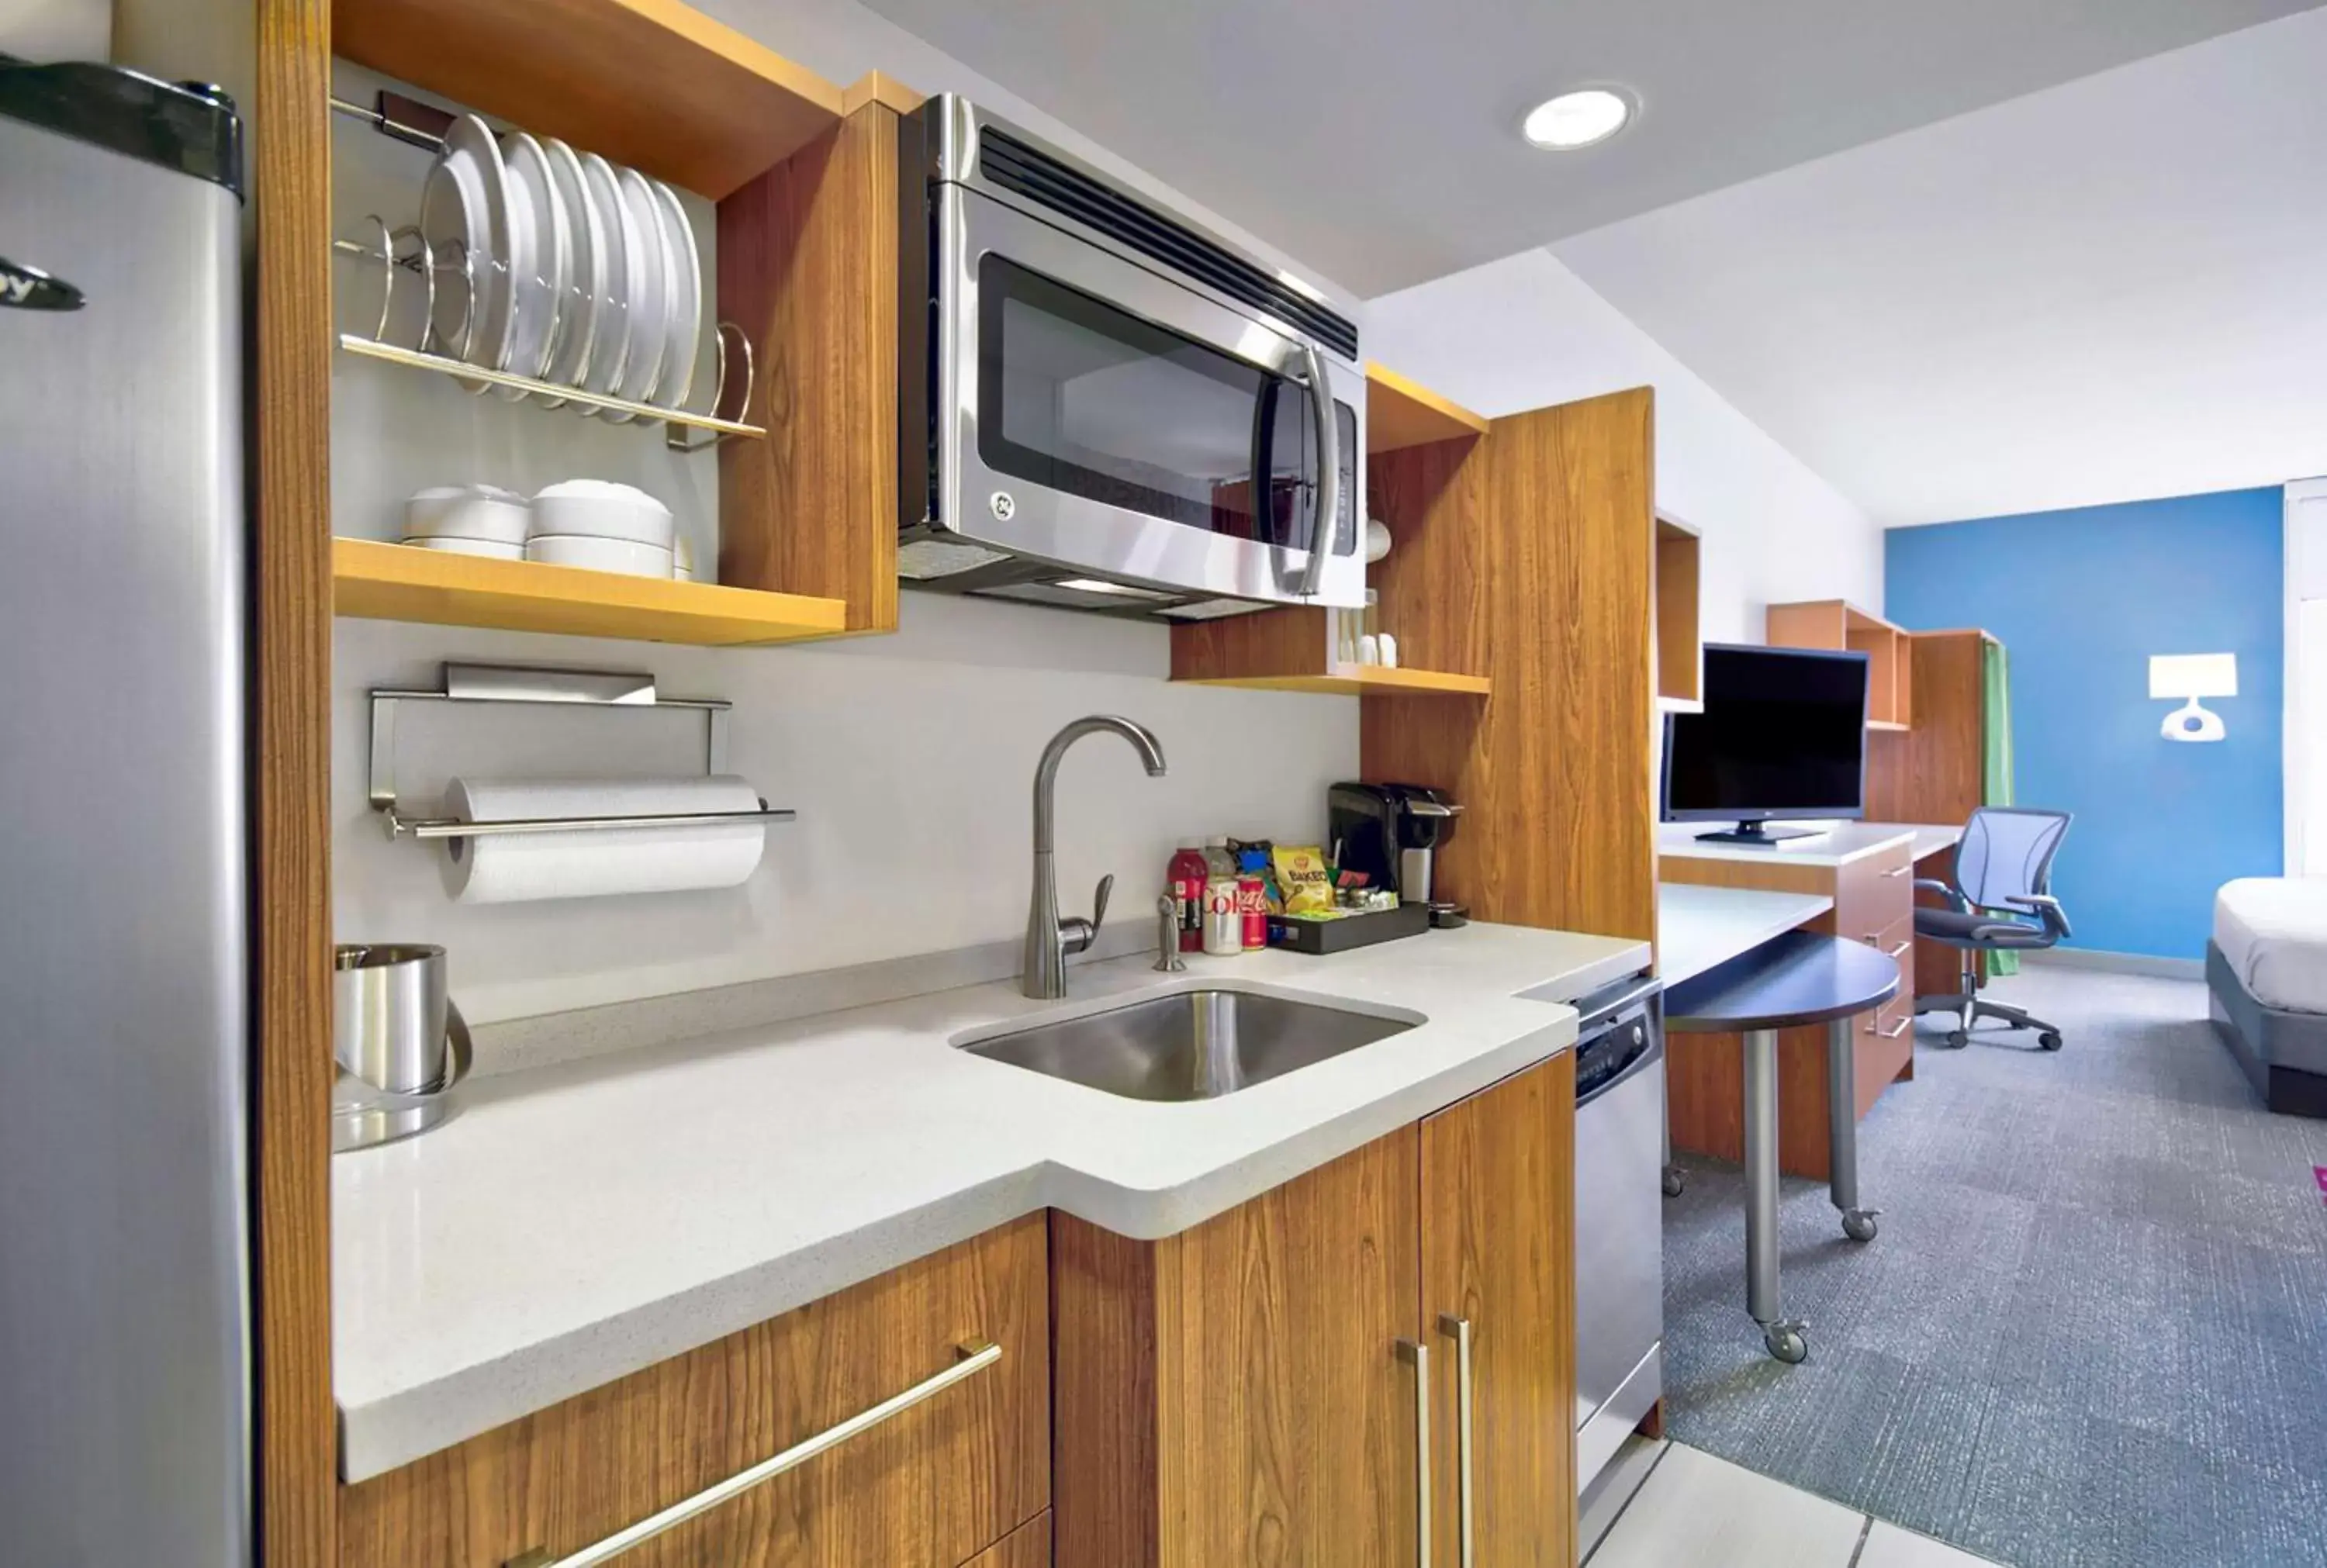 Kitchen or kitchenette, Kitchen/Kitchenette in Home2 Suites by Hilton Rochester Henrietta, NY